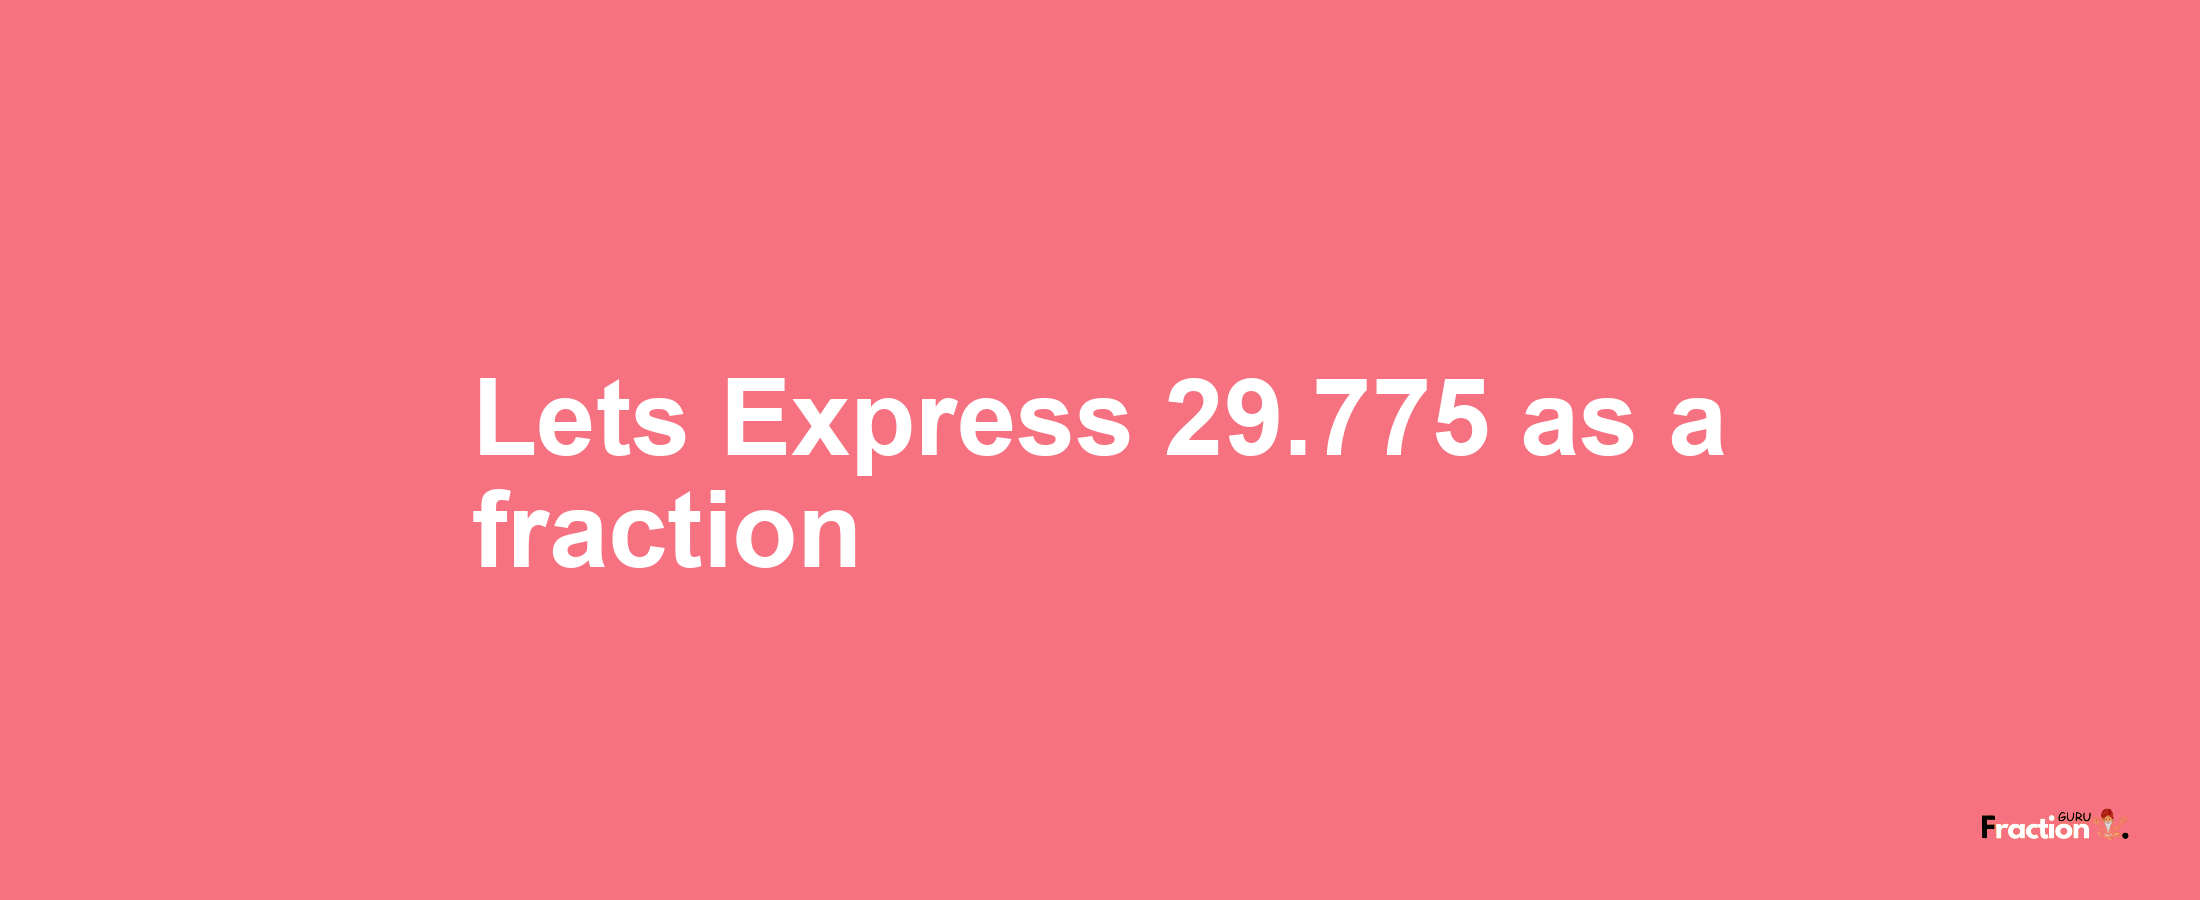 Lets Express 29.775 as afraction